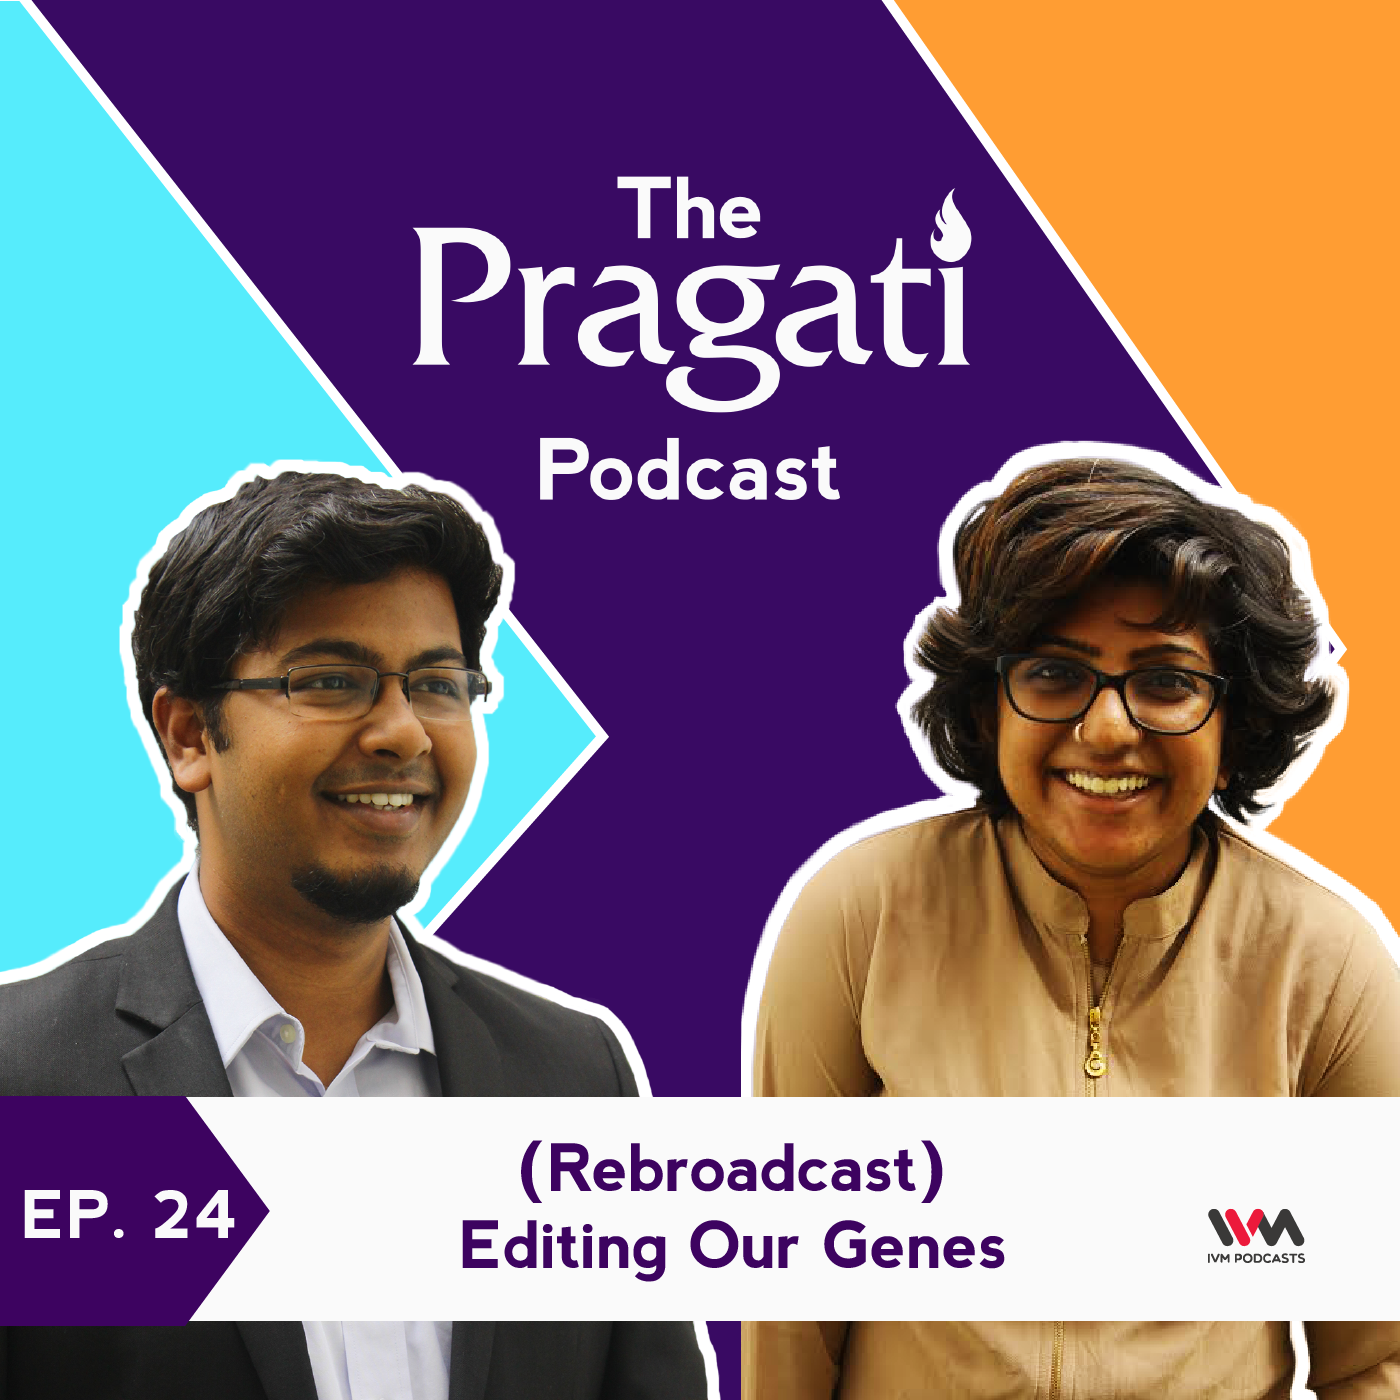 Ep. 24: (Rebroadcast) Editing Our Genes